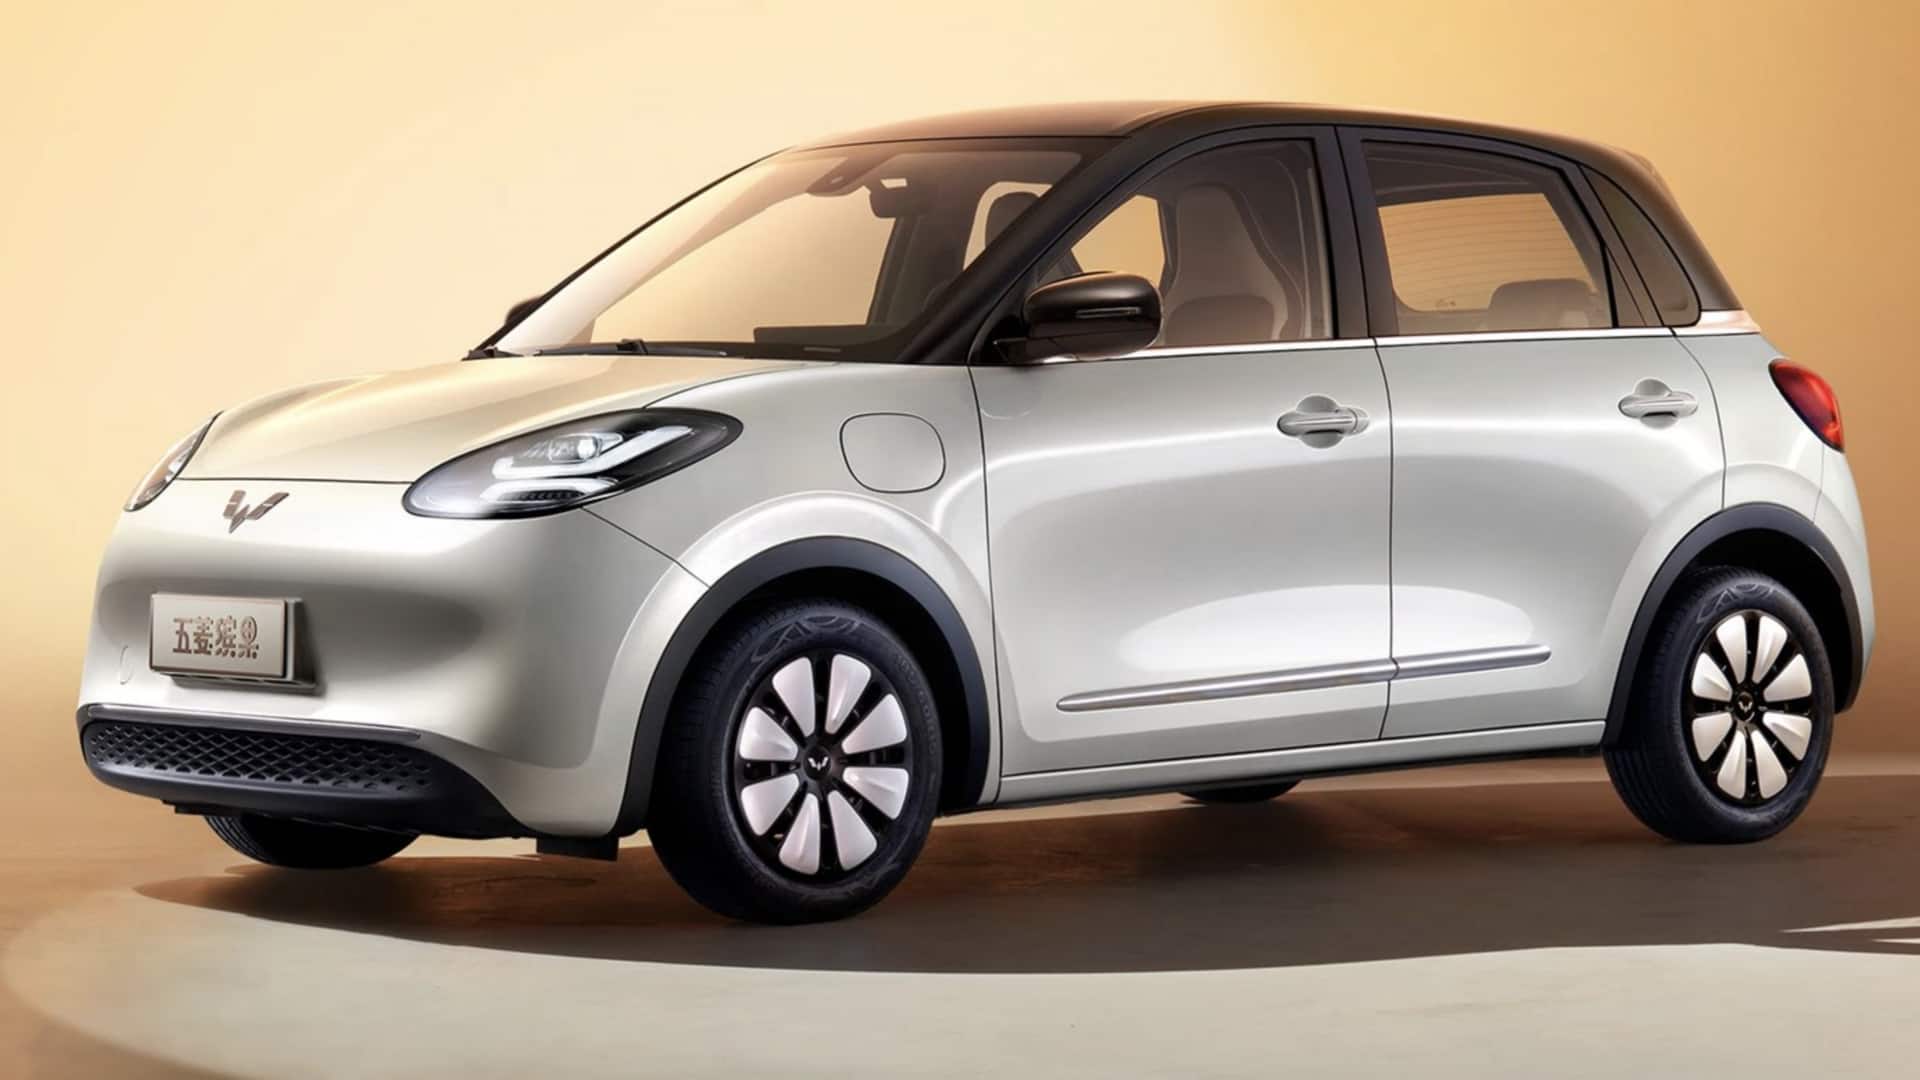 MG Bingo electric hatchback patented for India: What to expect